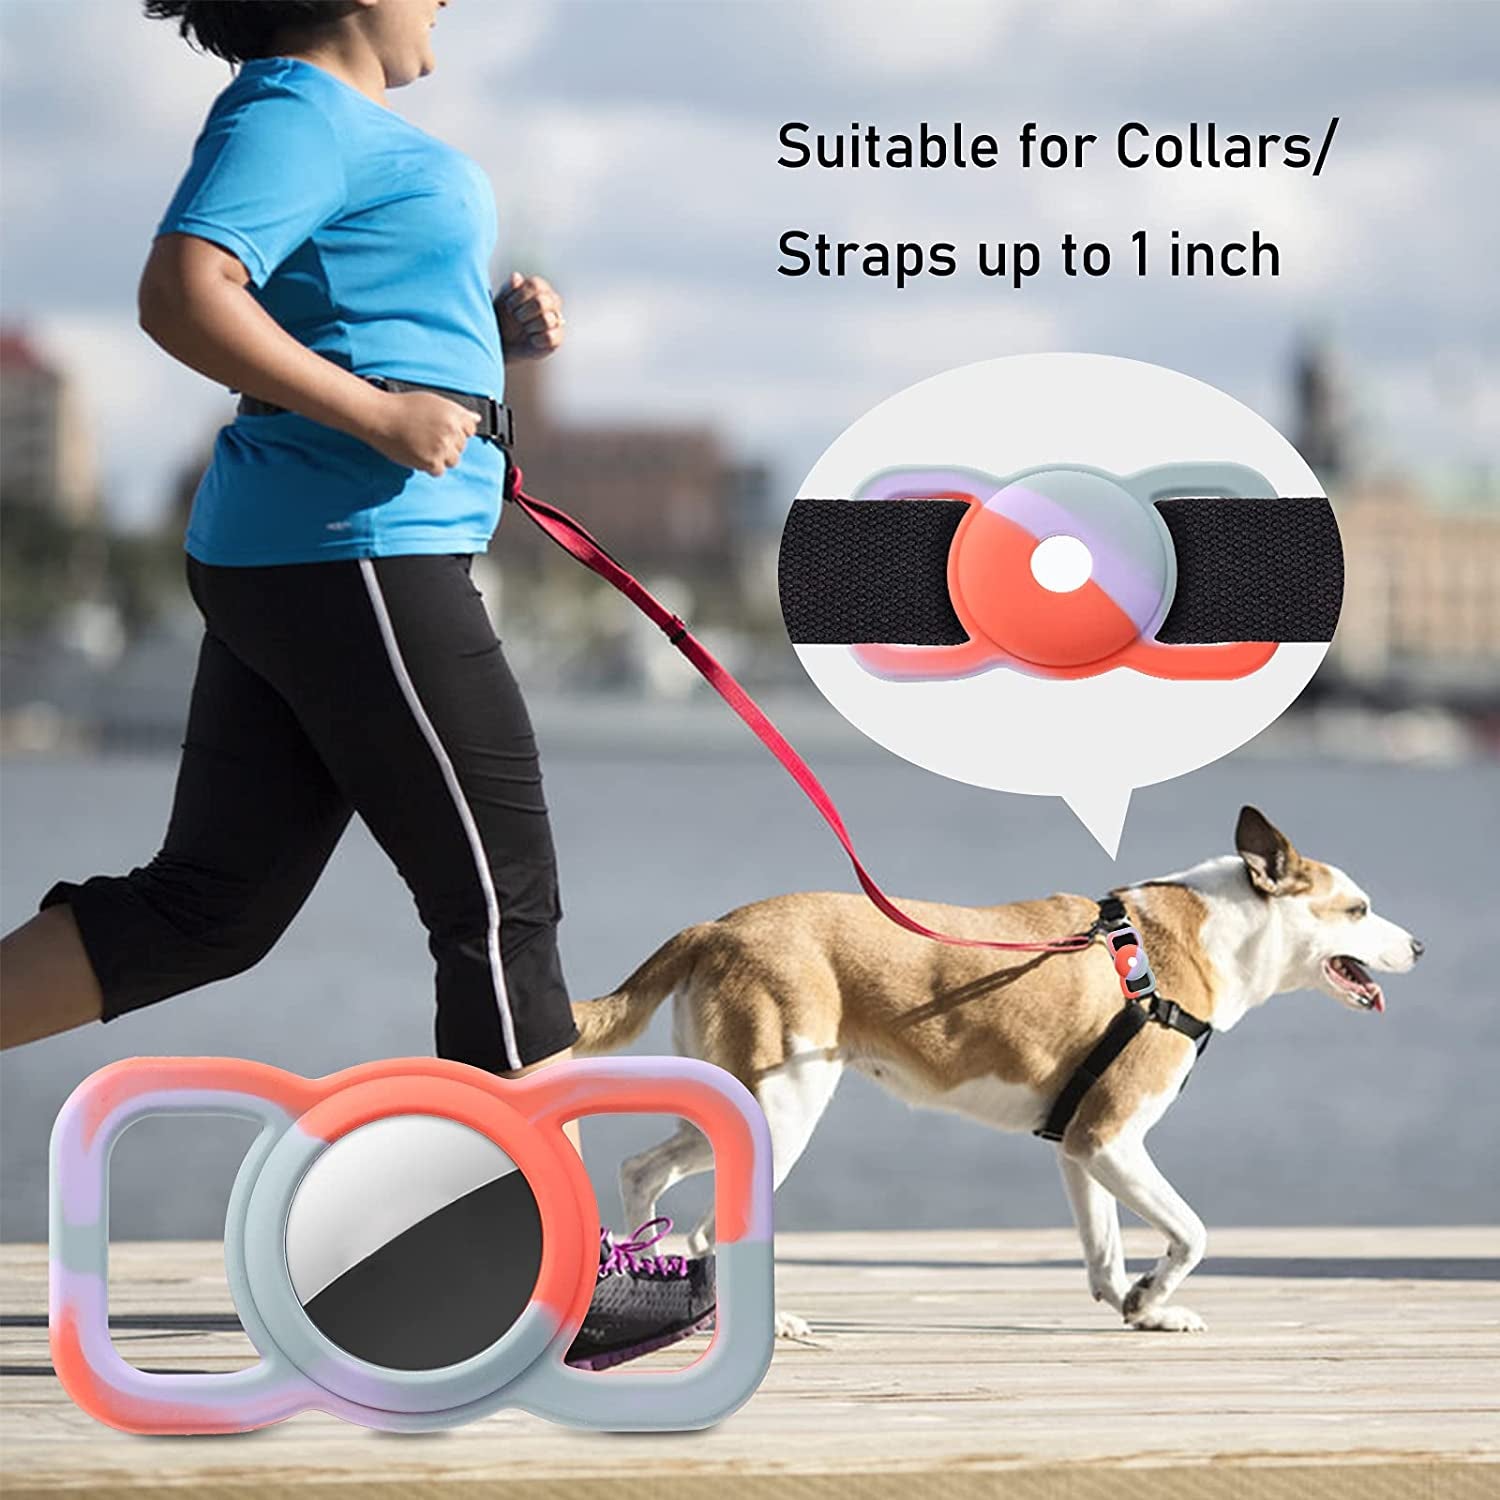 Silicone Airtag Holder with Airtags Case Keychain 6 Pack, Air Tag Holder Airtag Key Ring Cases Protective Cover Airtag Pet Loop Holder for Luggage Dogs Cats Collar Backpack, Airtag Accessories Holder Electronics > GPS Accessories > GPS Cases BOTOCO   